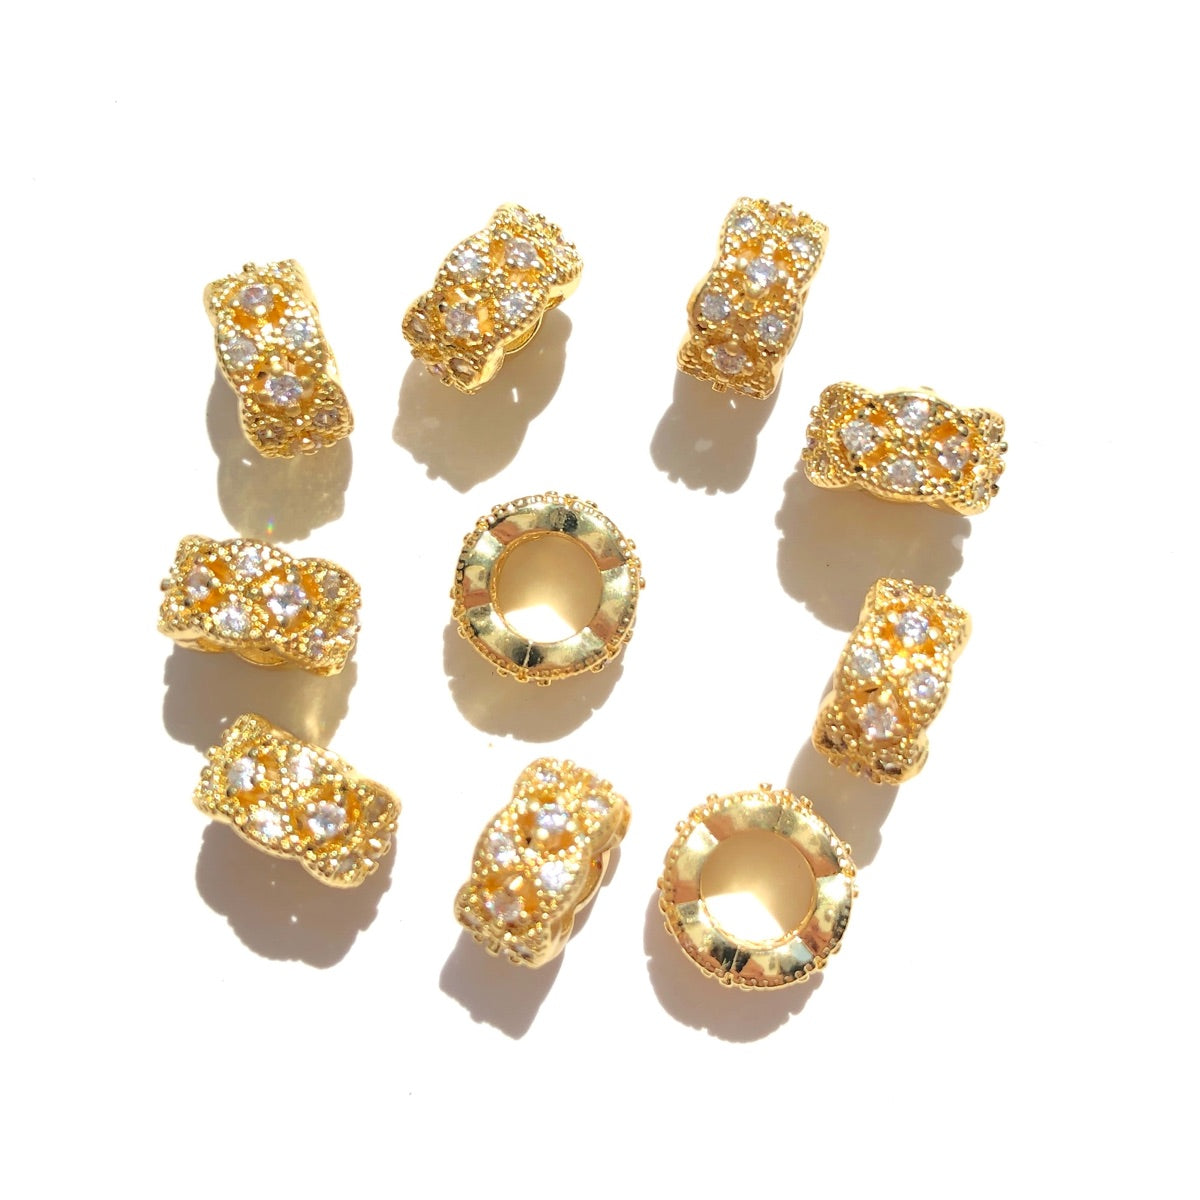 20-50pcs/lot 8mm CZ Paved Hollow Rondelle Wheel Spacers Gold CZ Paved Spacers New Spacers Arrivals Rondelle Beads Wholesale Charms Beads Beyond